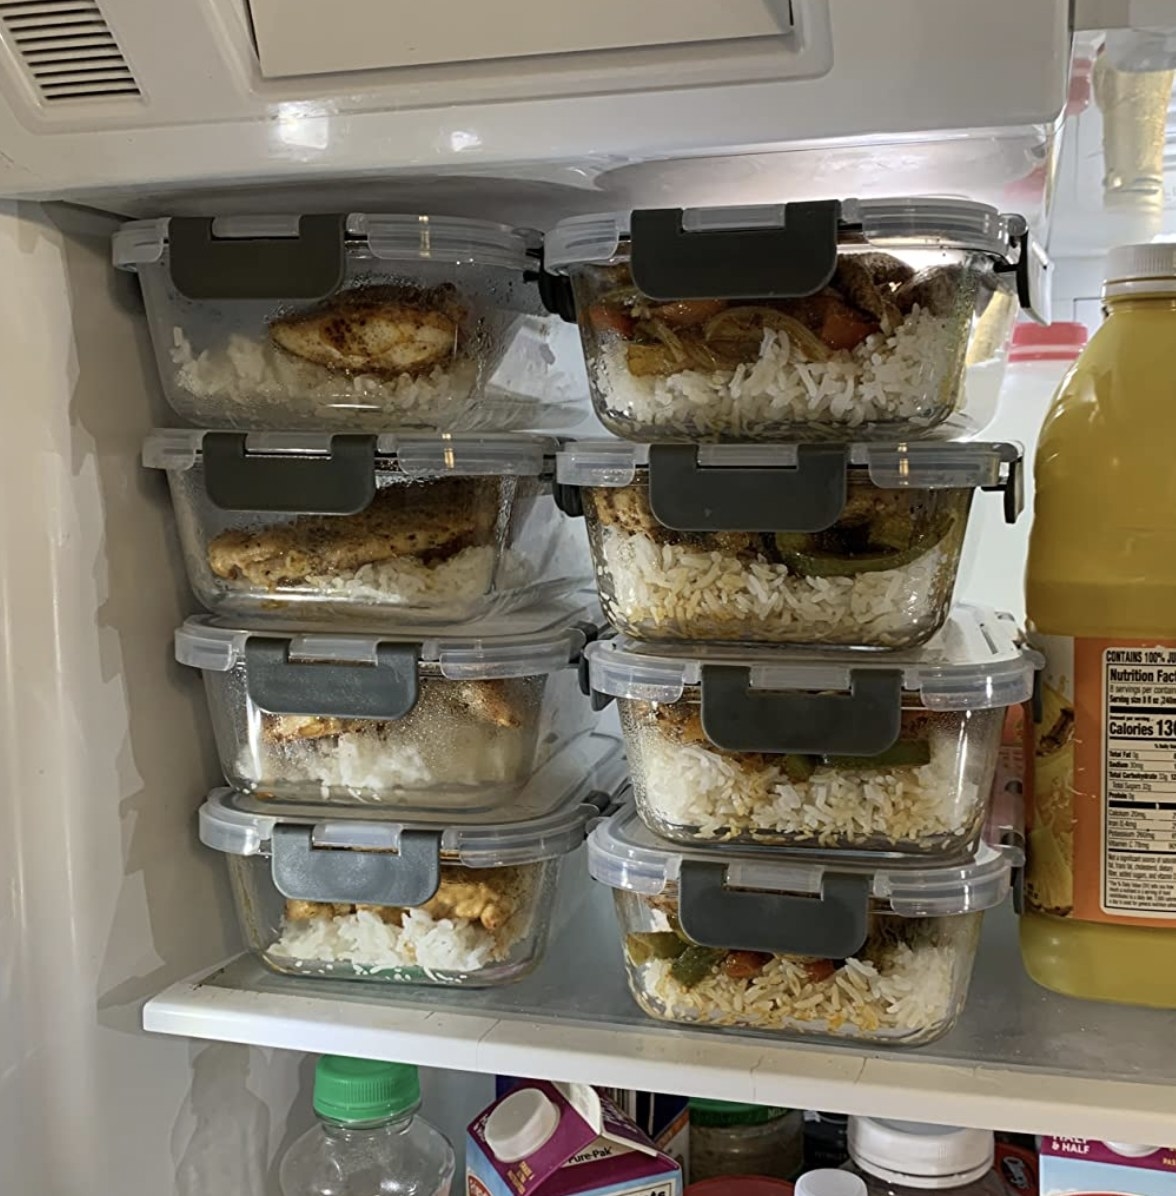 a photo of the entire set being used to meal prep in a fridge